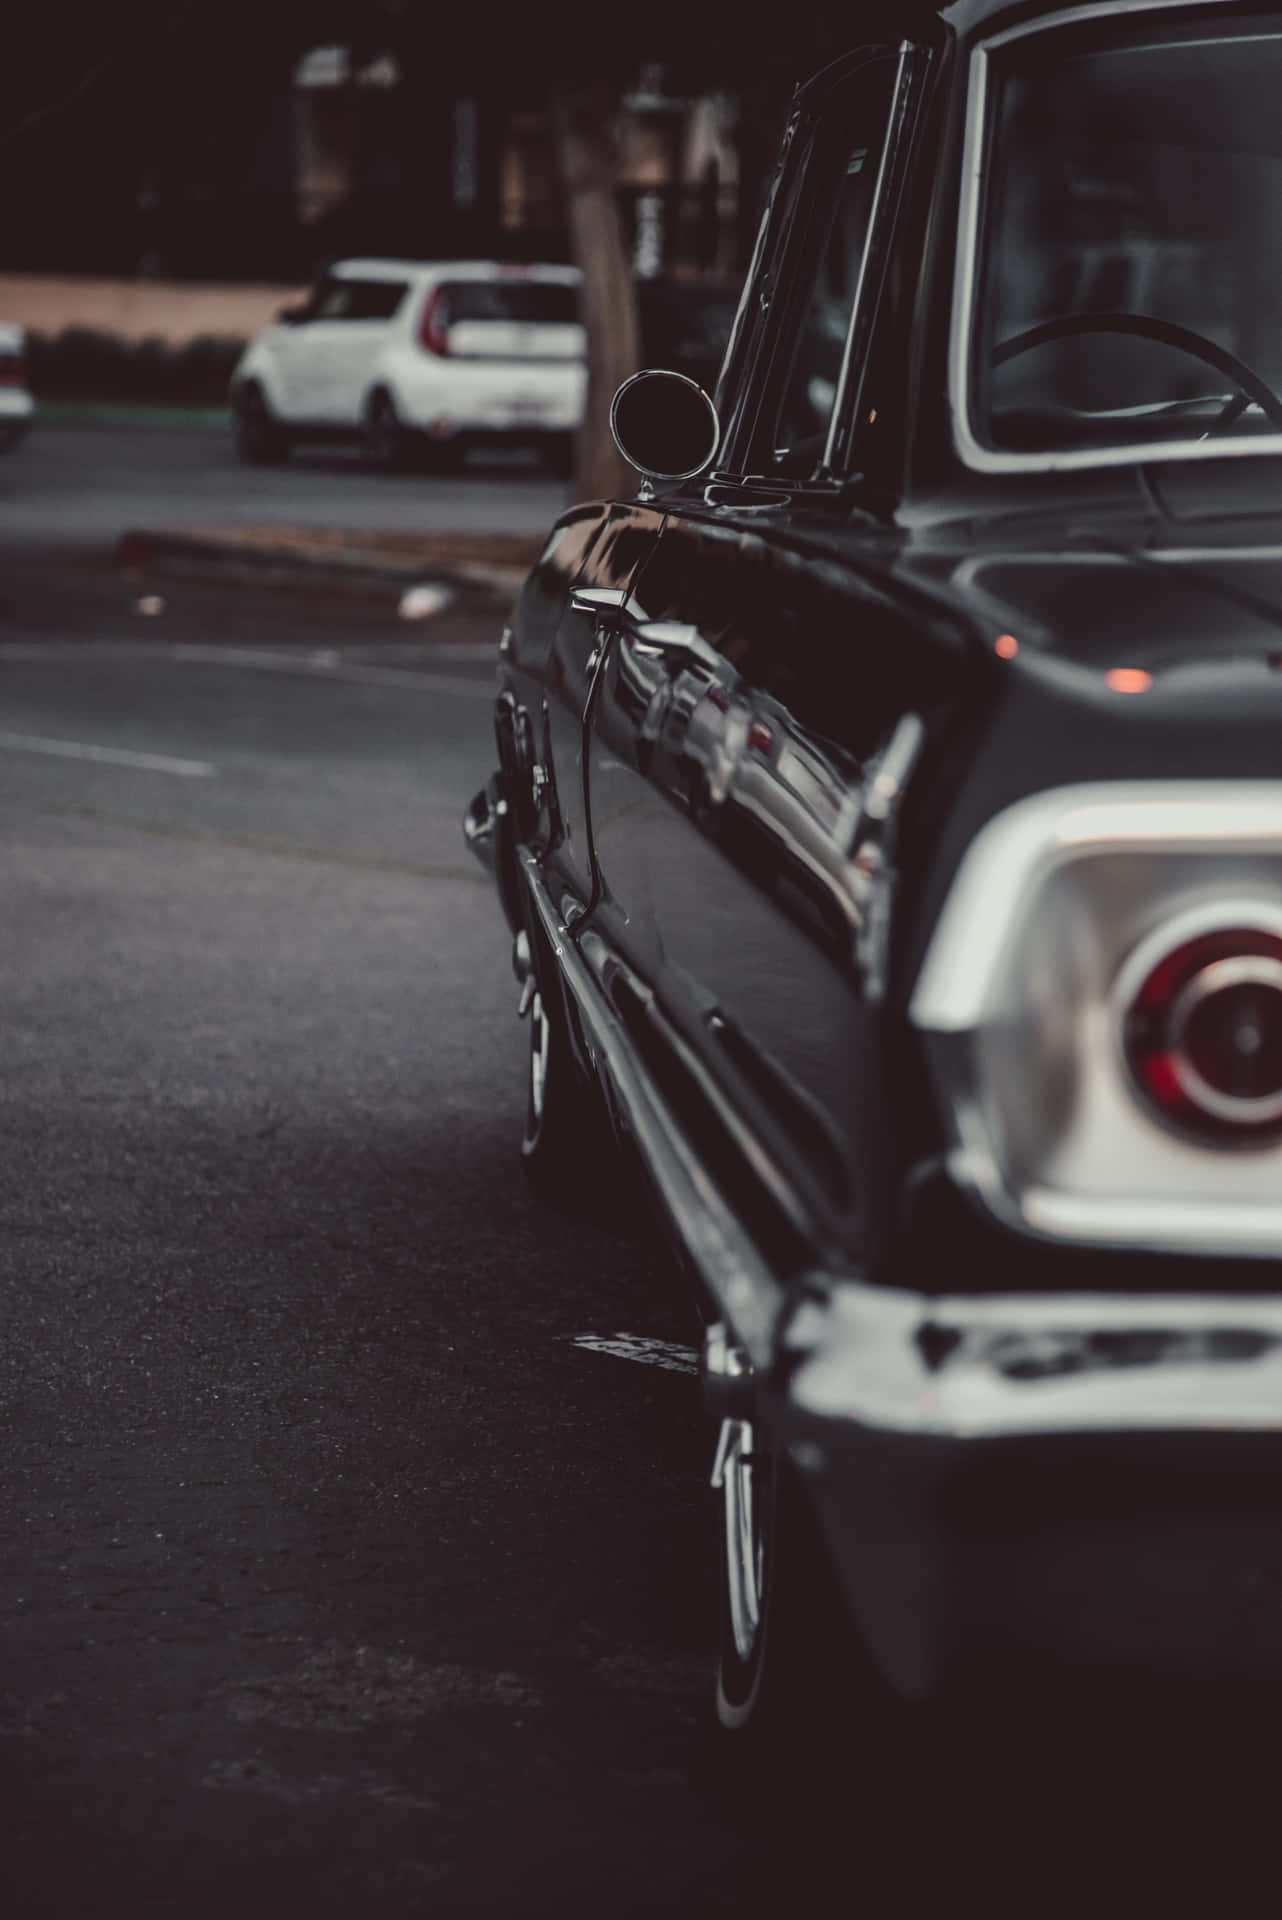 Classic Elegance: A Black and White Vintage Car Wallpaper